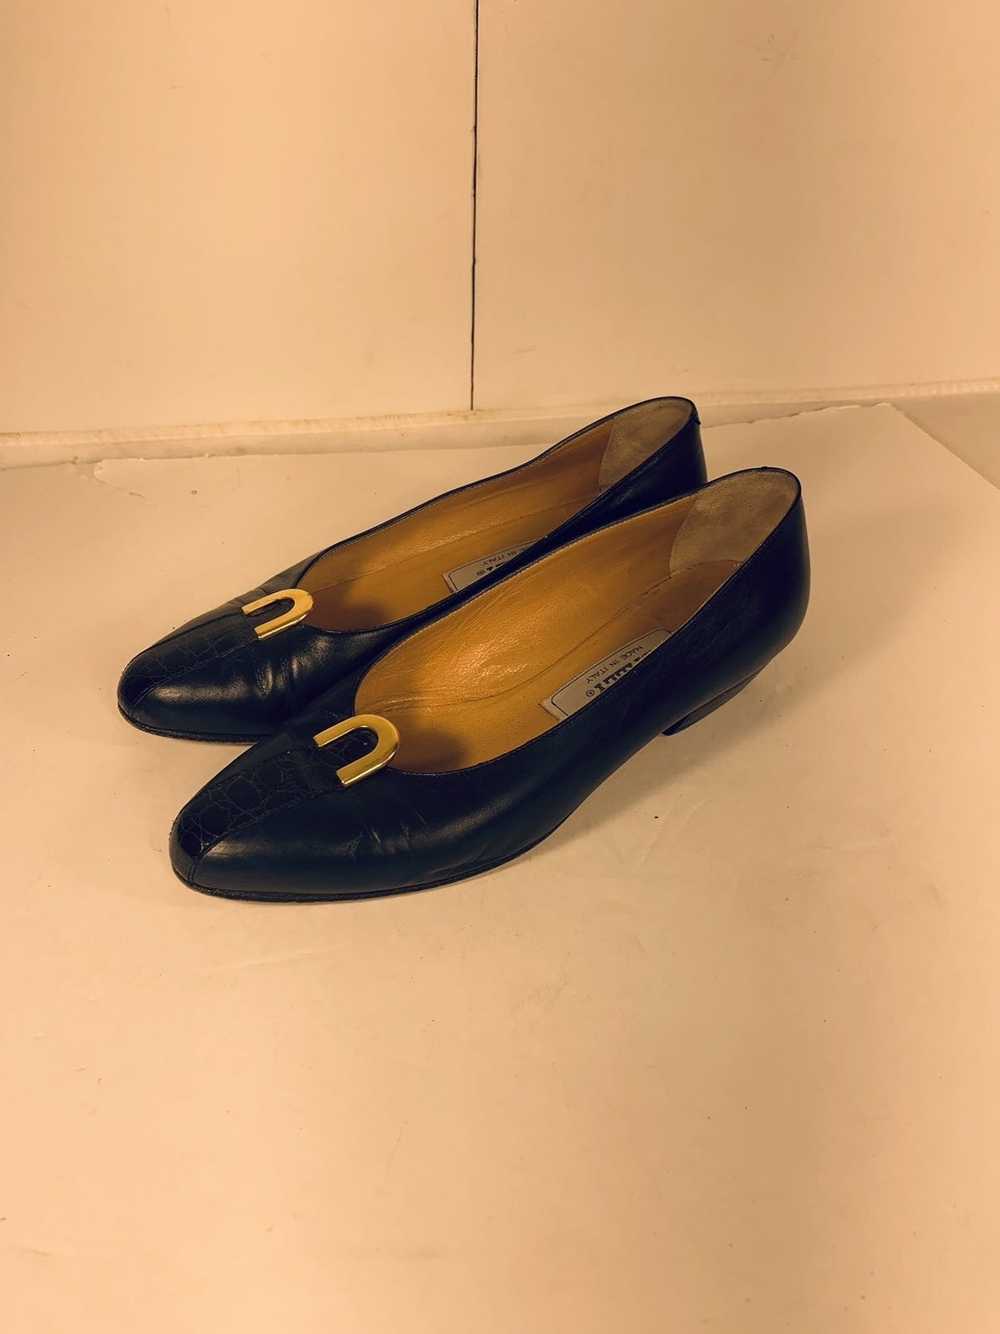 Bally Bally Slip On Loafers Flats Shoes - image 2